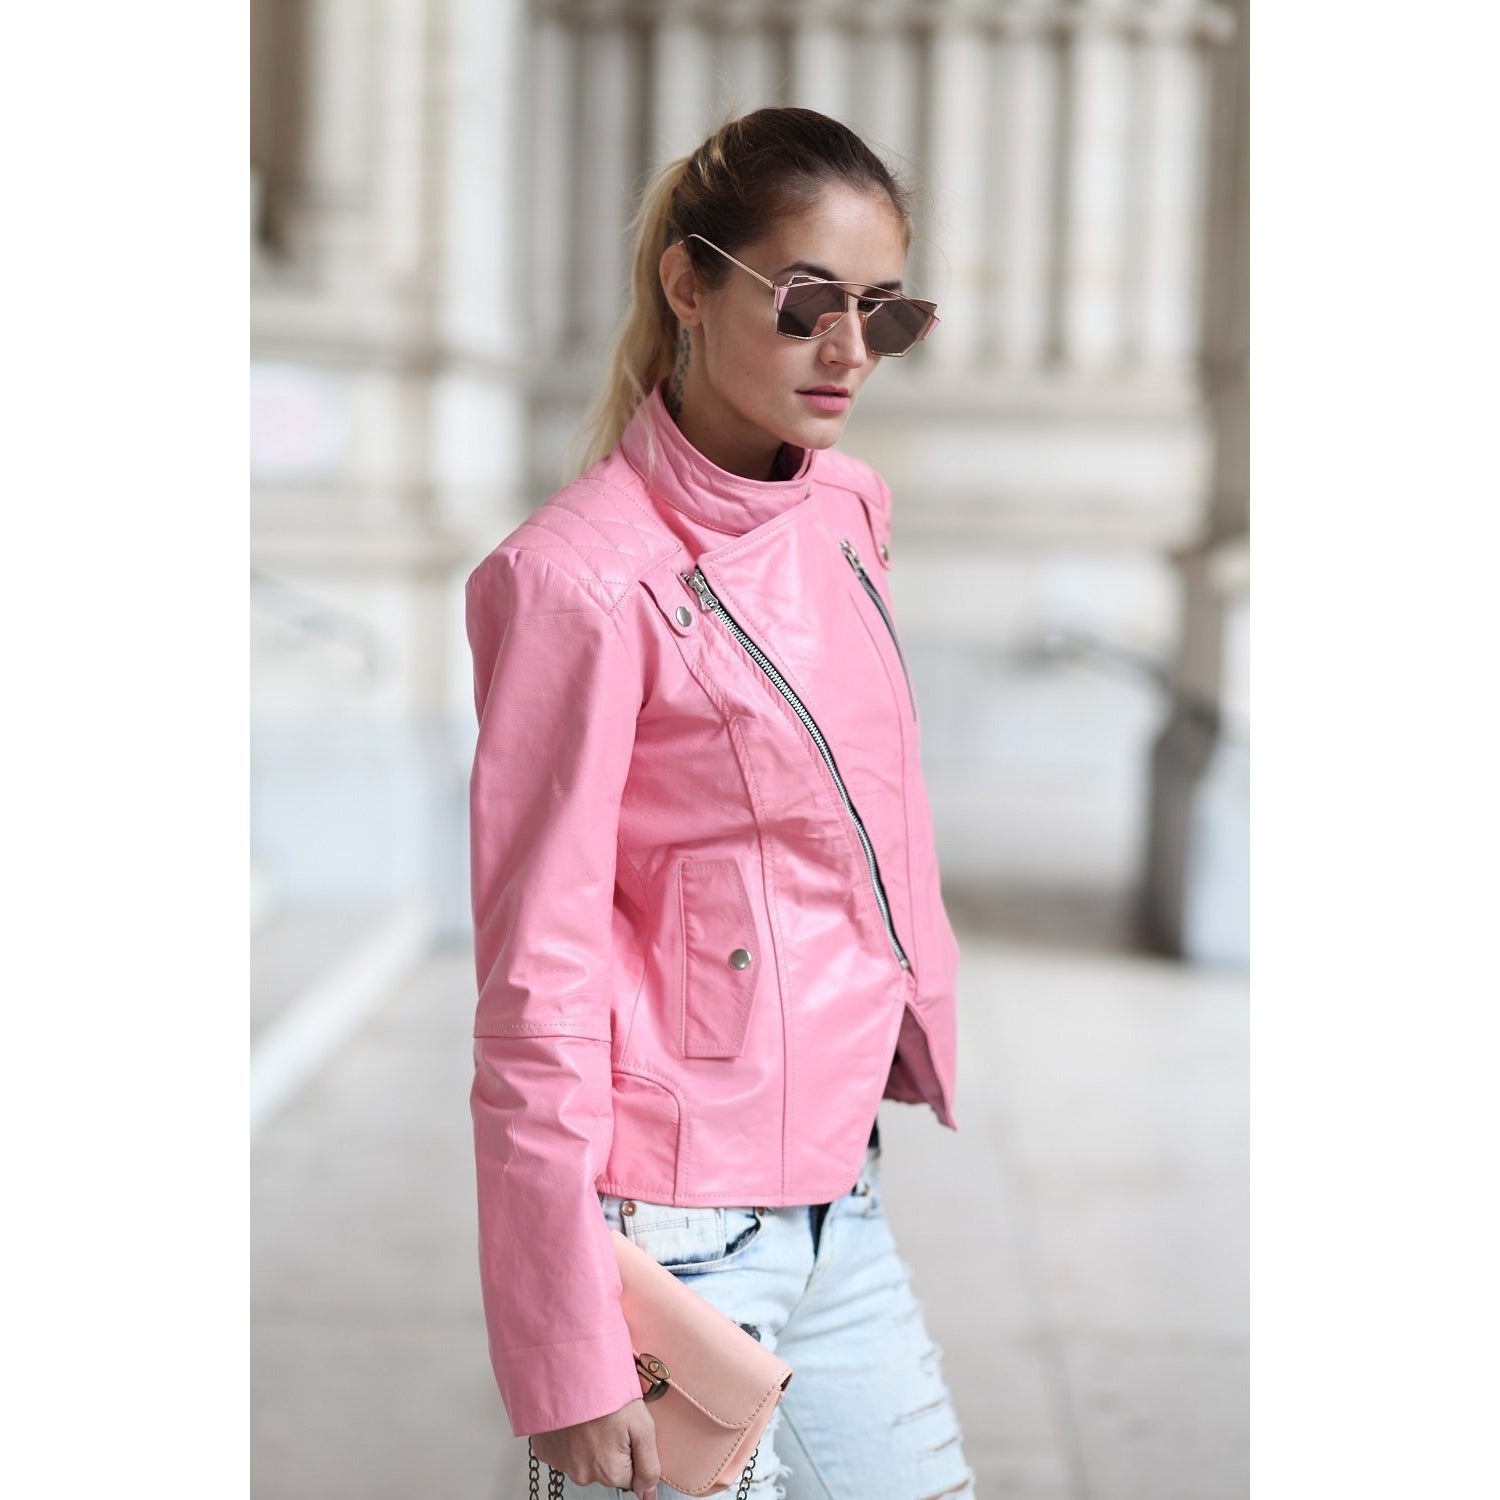 Womens Pink Biker Style Leather Jacket - Shoplectic